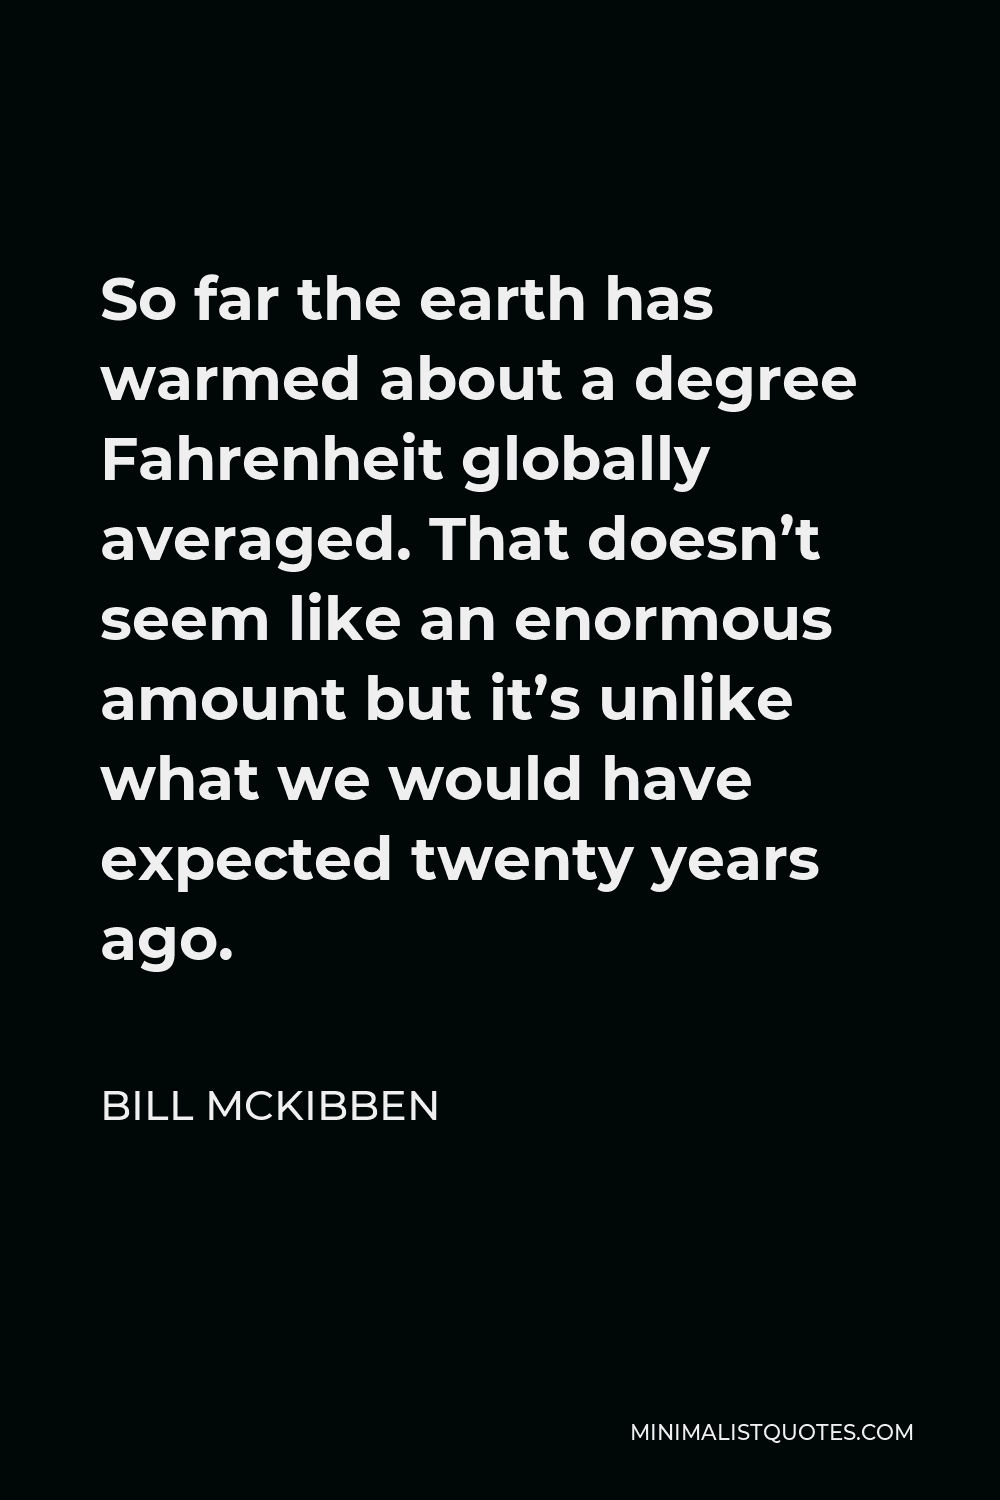 Bill McKibben Quote - So far the earth has warmed about a degree Fahrenheit globally averaged. That doesn’t seem like an enormous amount but it’s unlike what we would have expected twenty years ago.